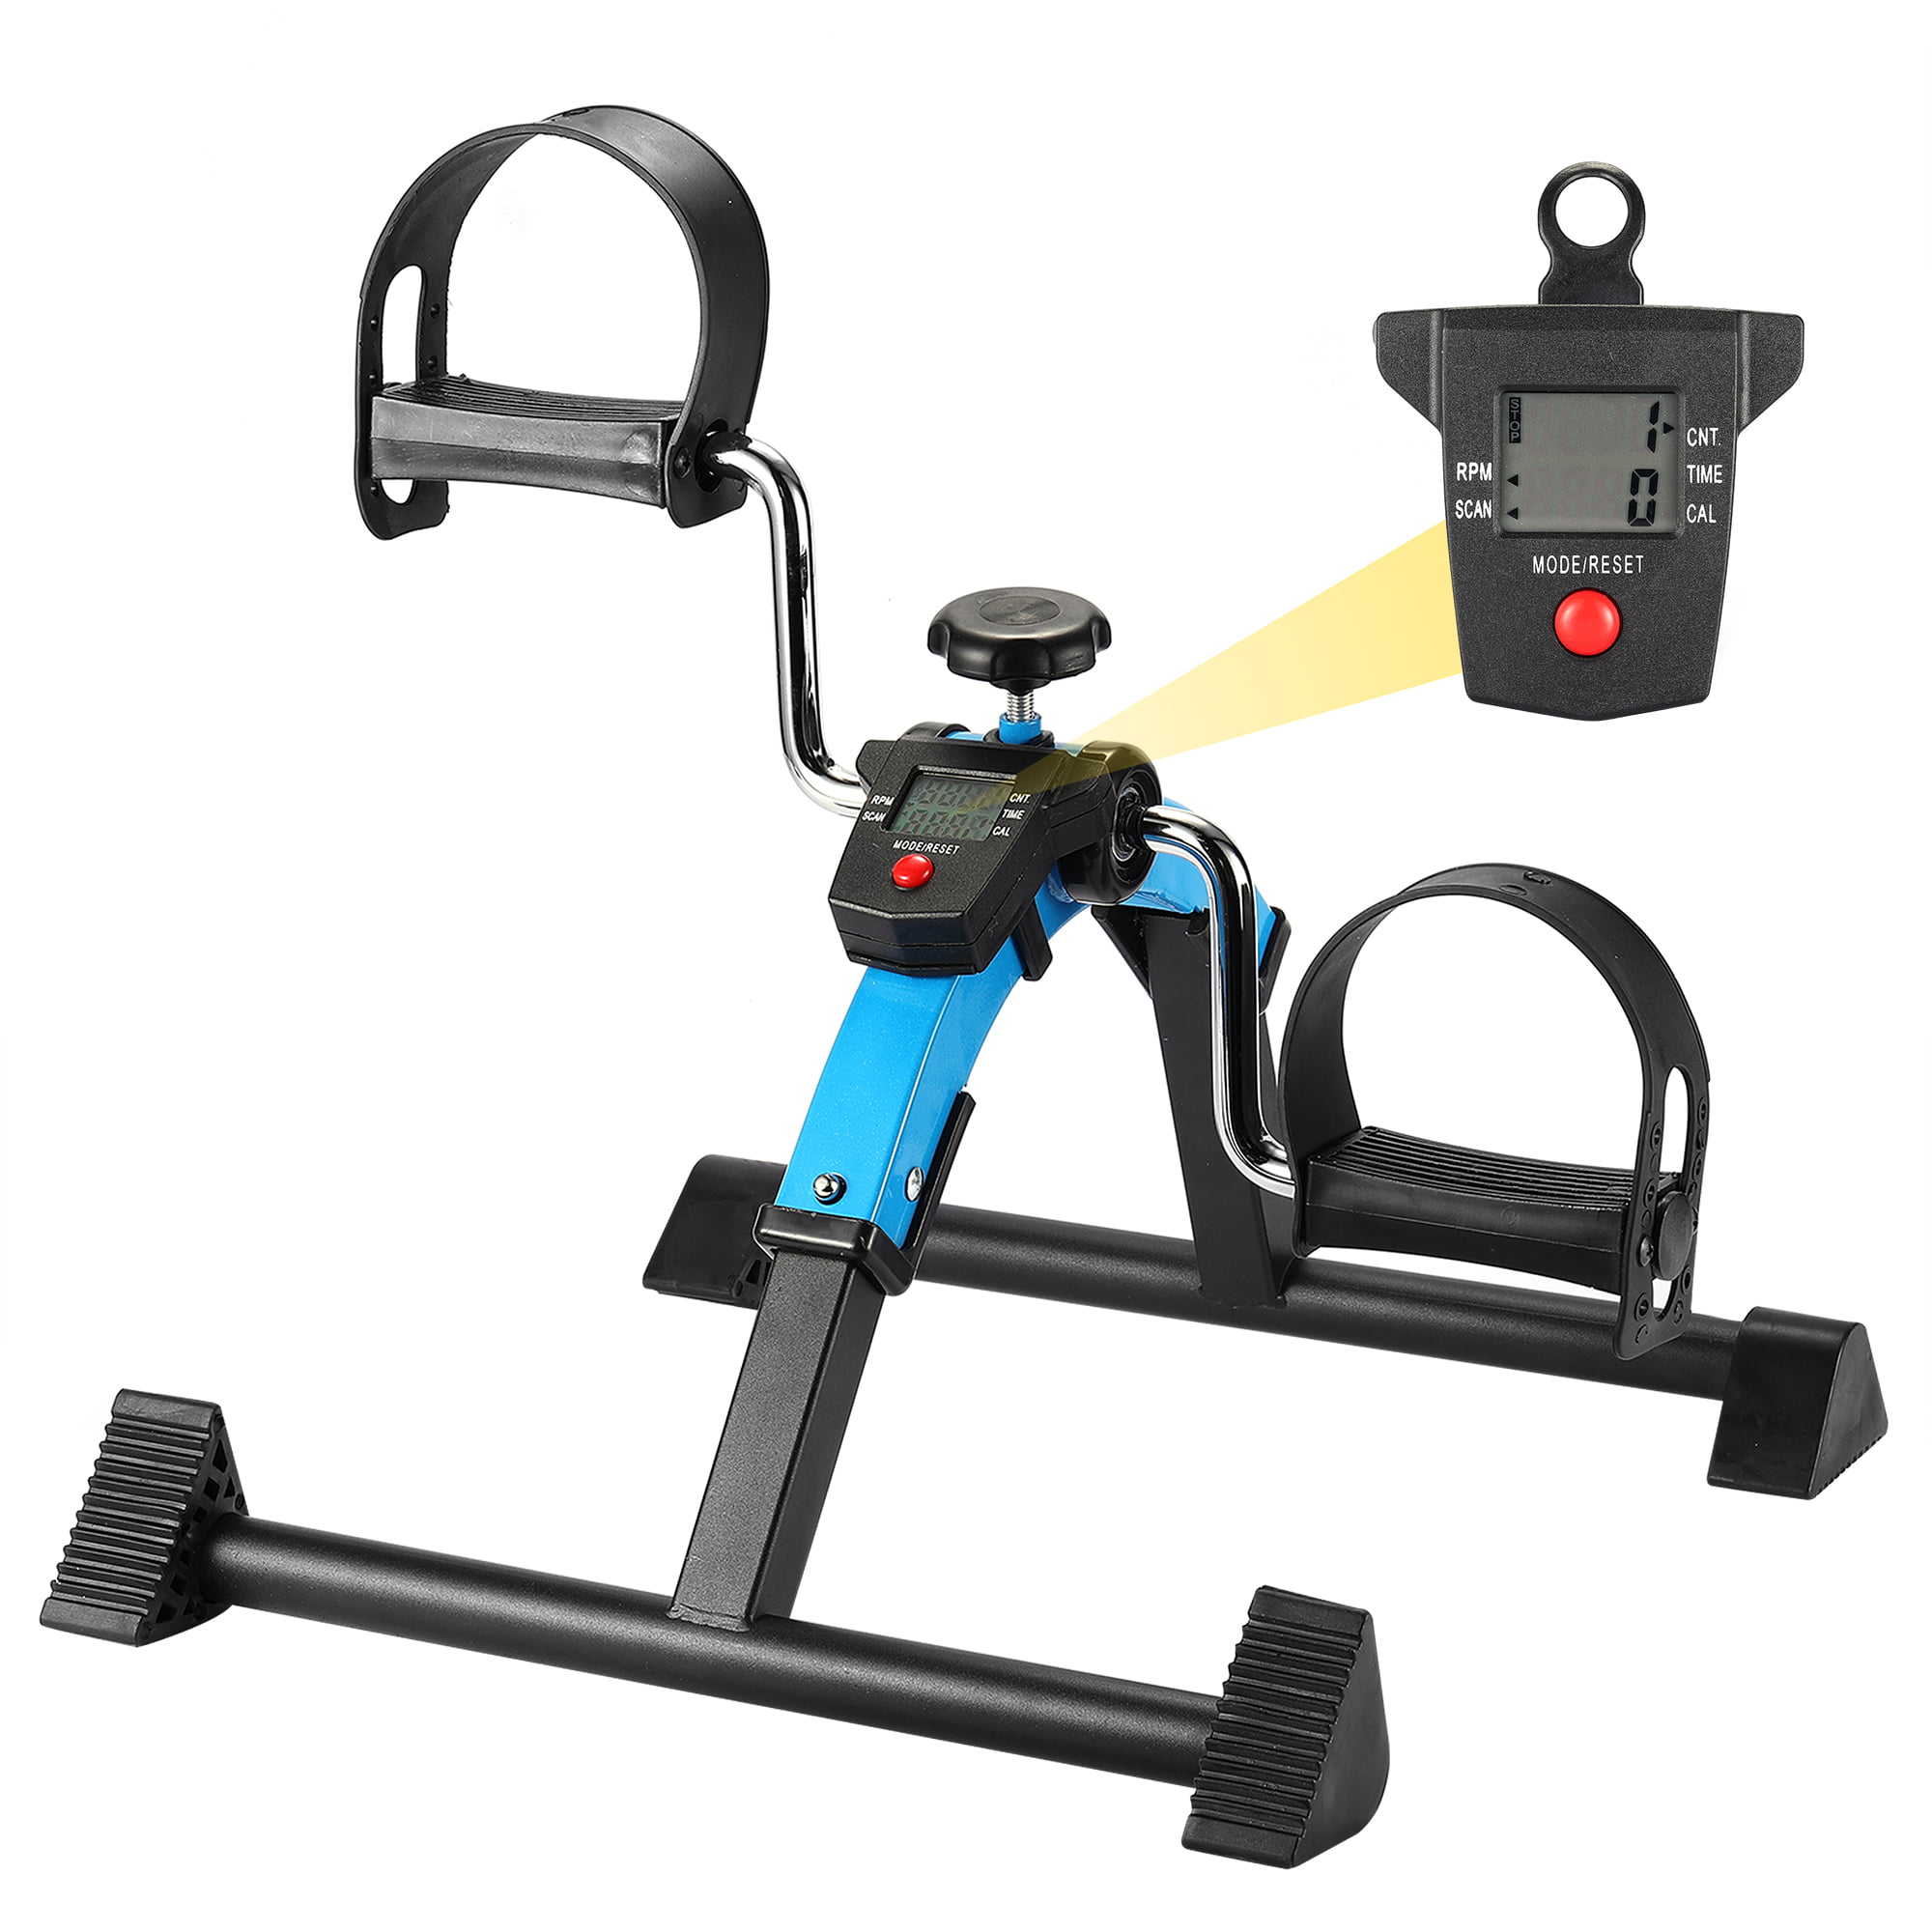 Portable Fitness Pedal Stationary Under Desk Exercise Machine Bike for Arms L... 